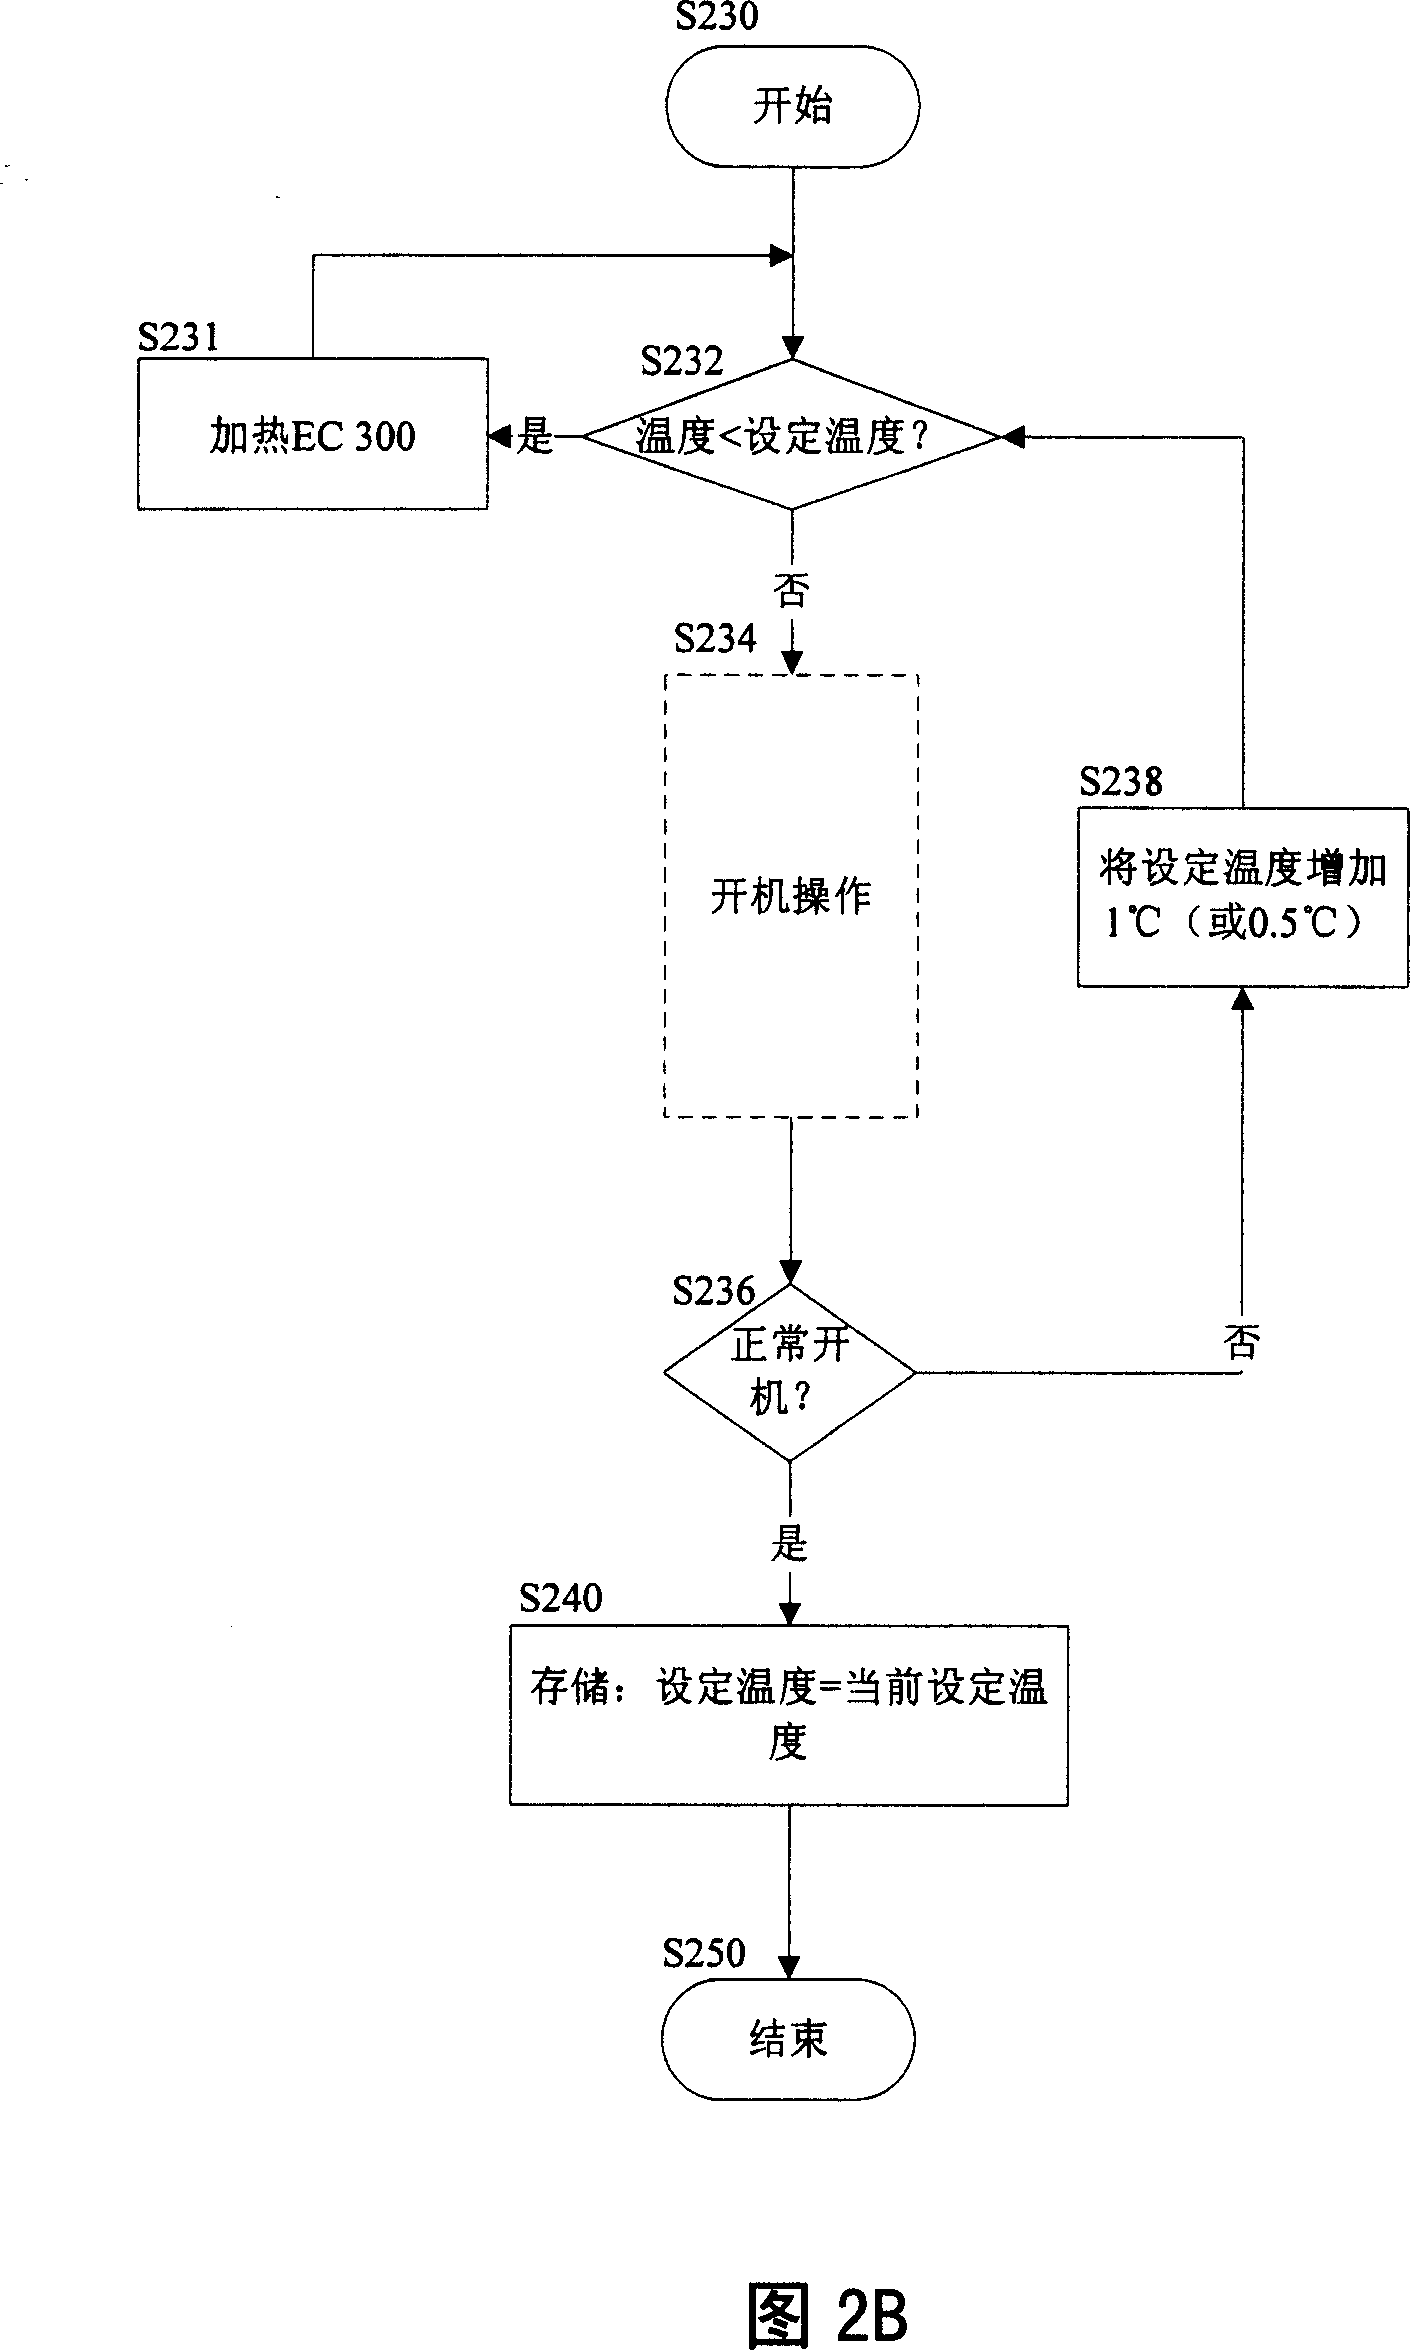 Low-temperature reinforcing system and method for computer